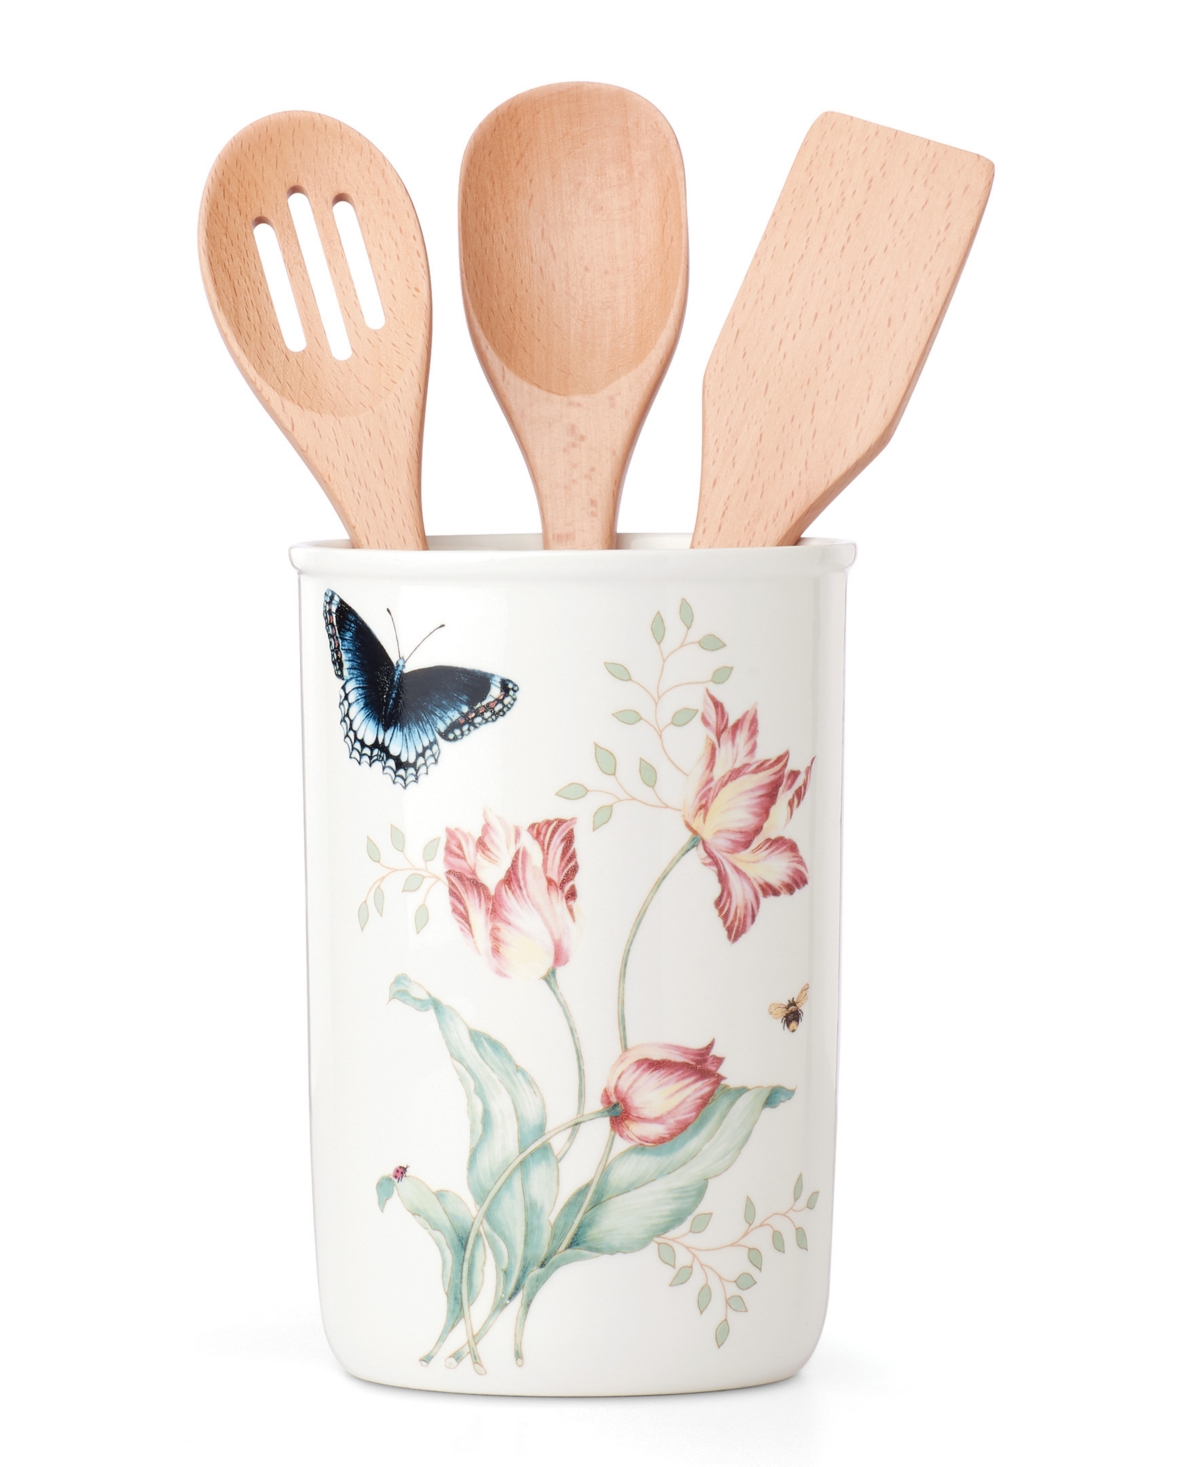 Lenox Butterfly Meadow Kitchen Jar With Utensils, Created For Macy's In White Body W,pastel Floral And Botanical